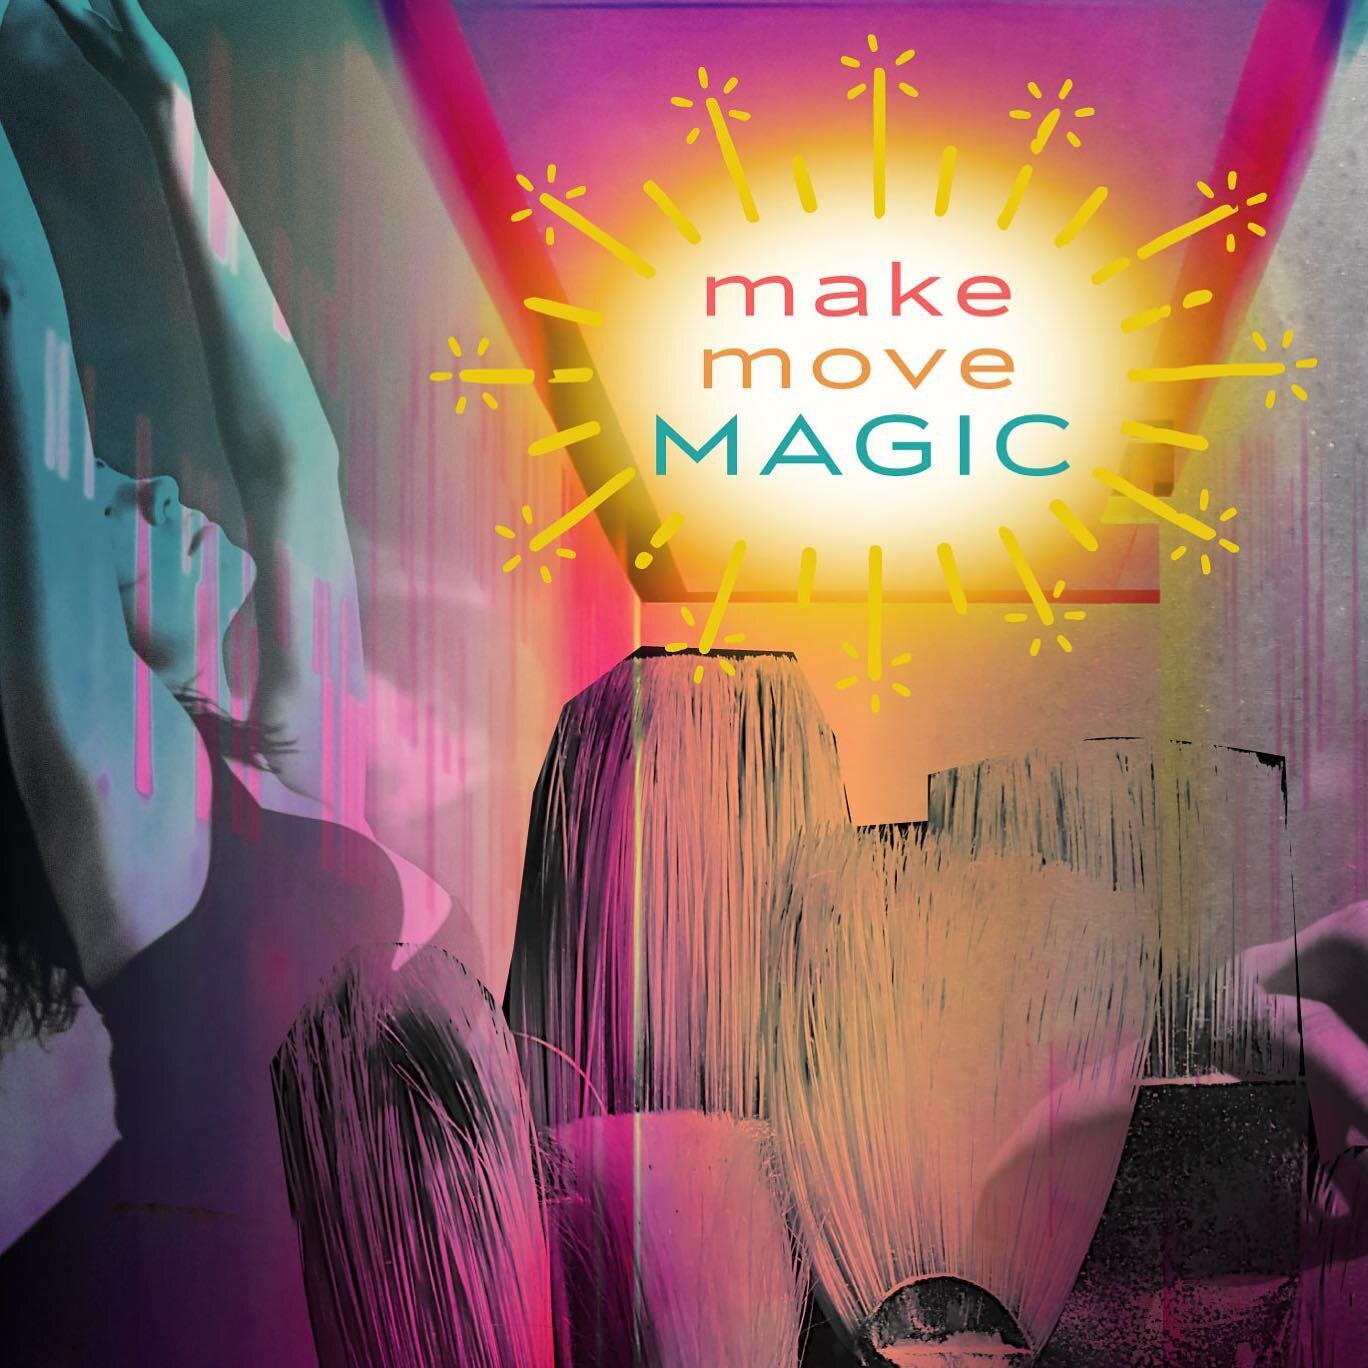 Good news! My Make - Move - Magic workshop is coming back to @truenaturehealingarts this summer! The first workshop in February was so well received, I&rsquo;m thrilled to have been invited back. I combine intuitive art, movement, and powerful energy